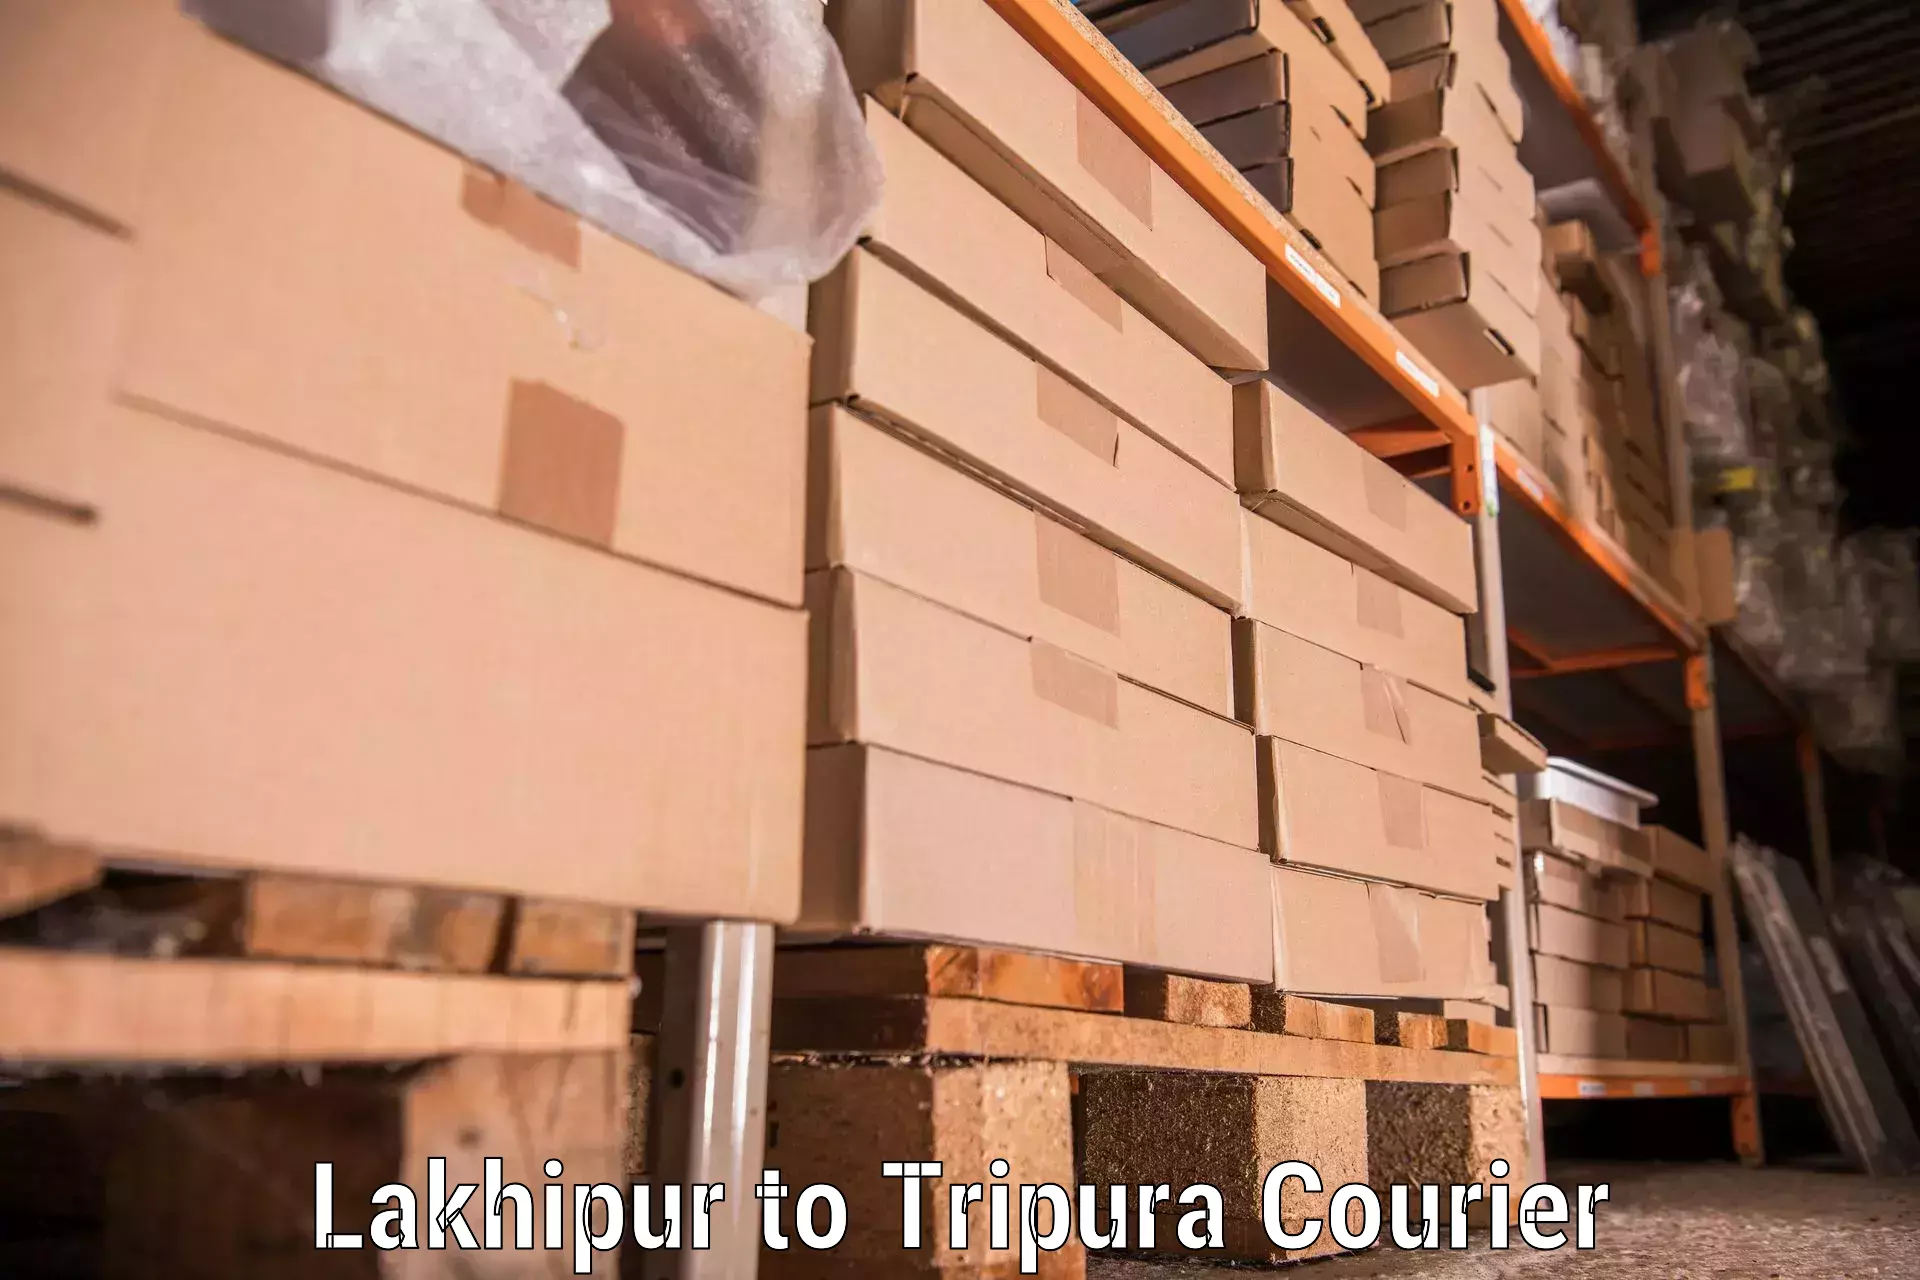 Moving and packing experts Lakhipur to Tripura